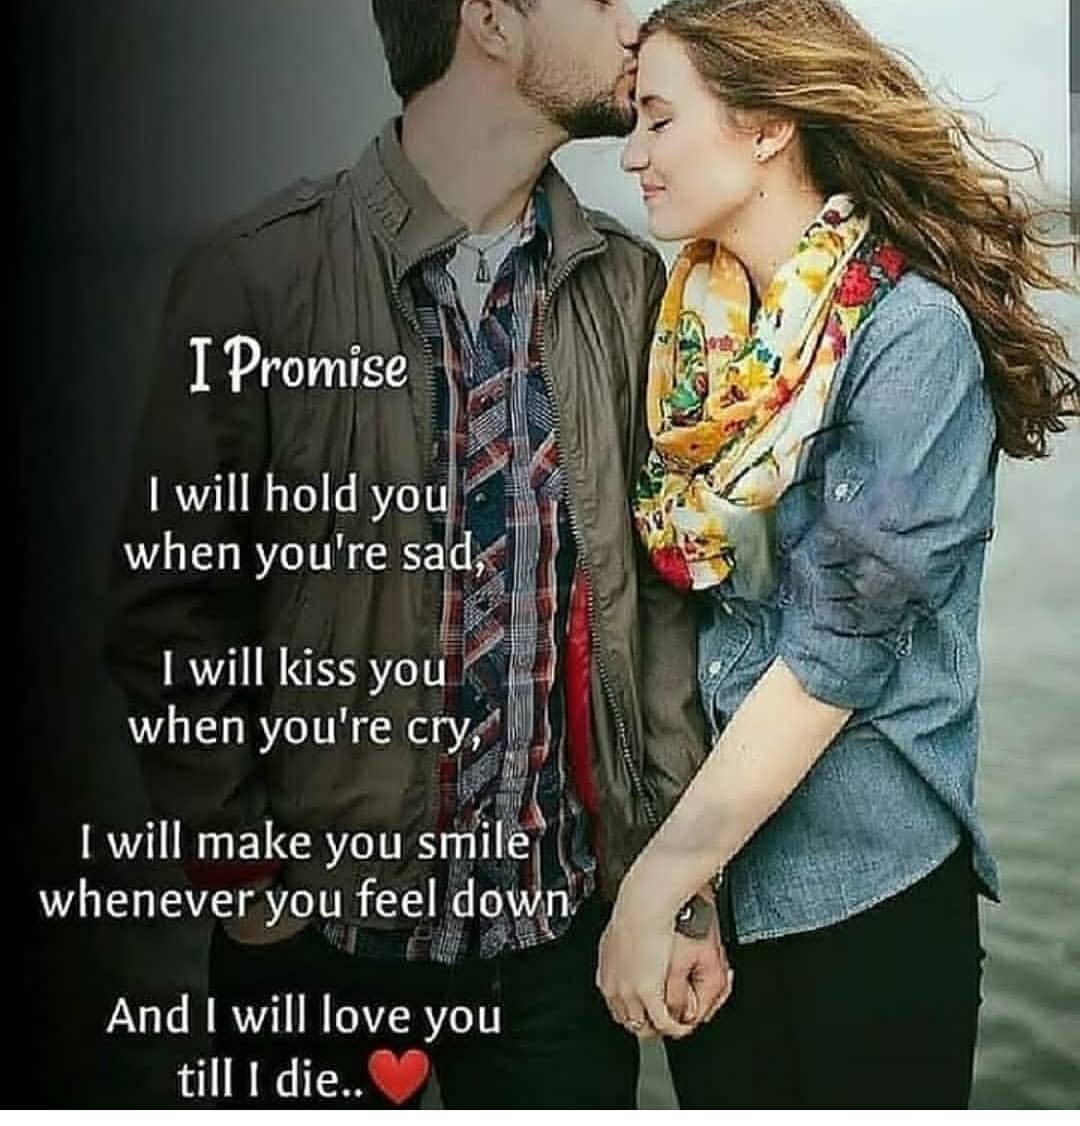 I Promise I will hold yo when you're sad, I will kiss you when you're cry, I will make you smile whenever you feel And I will love you till I die..